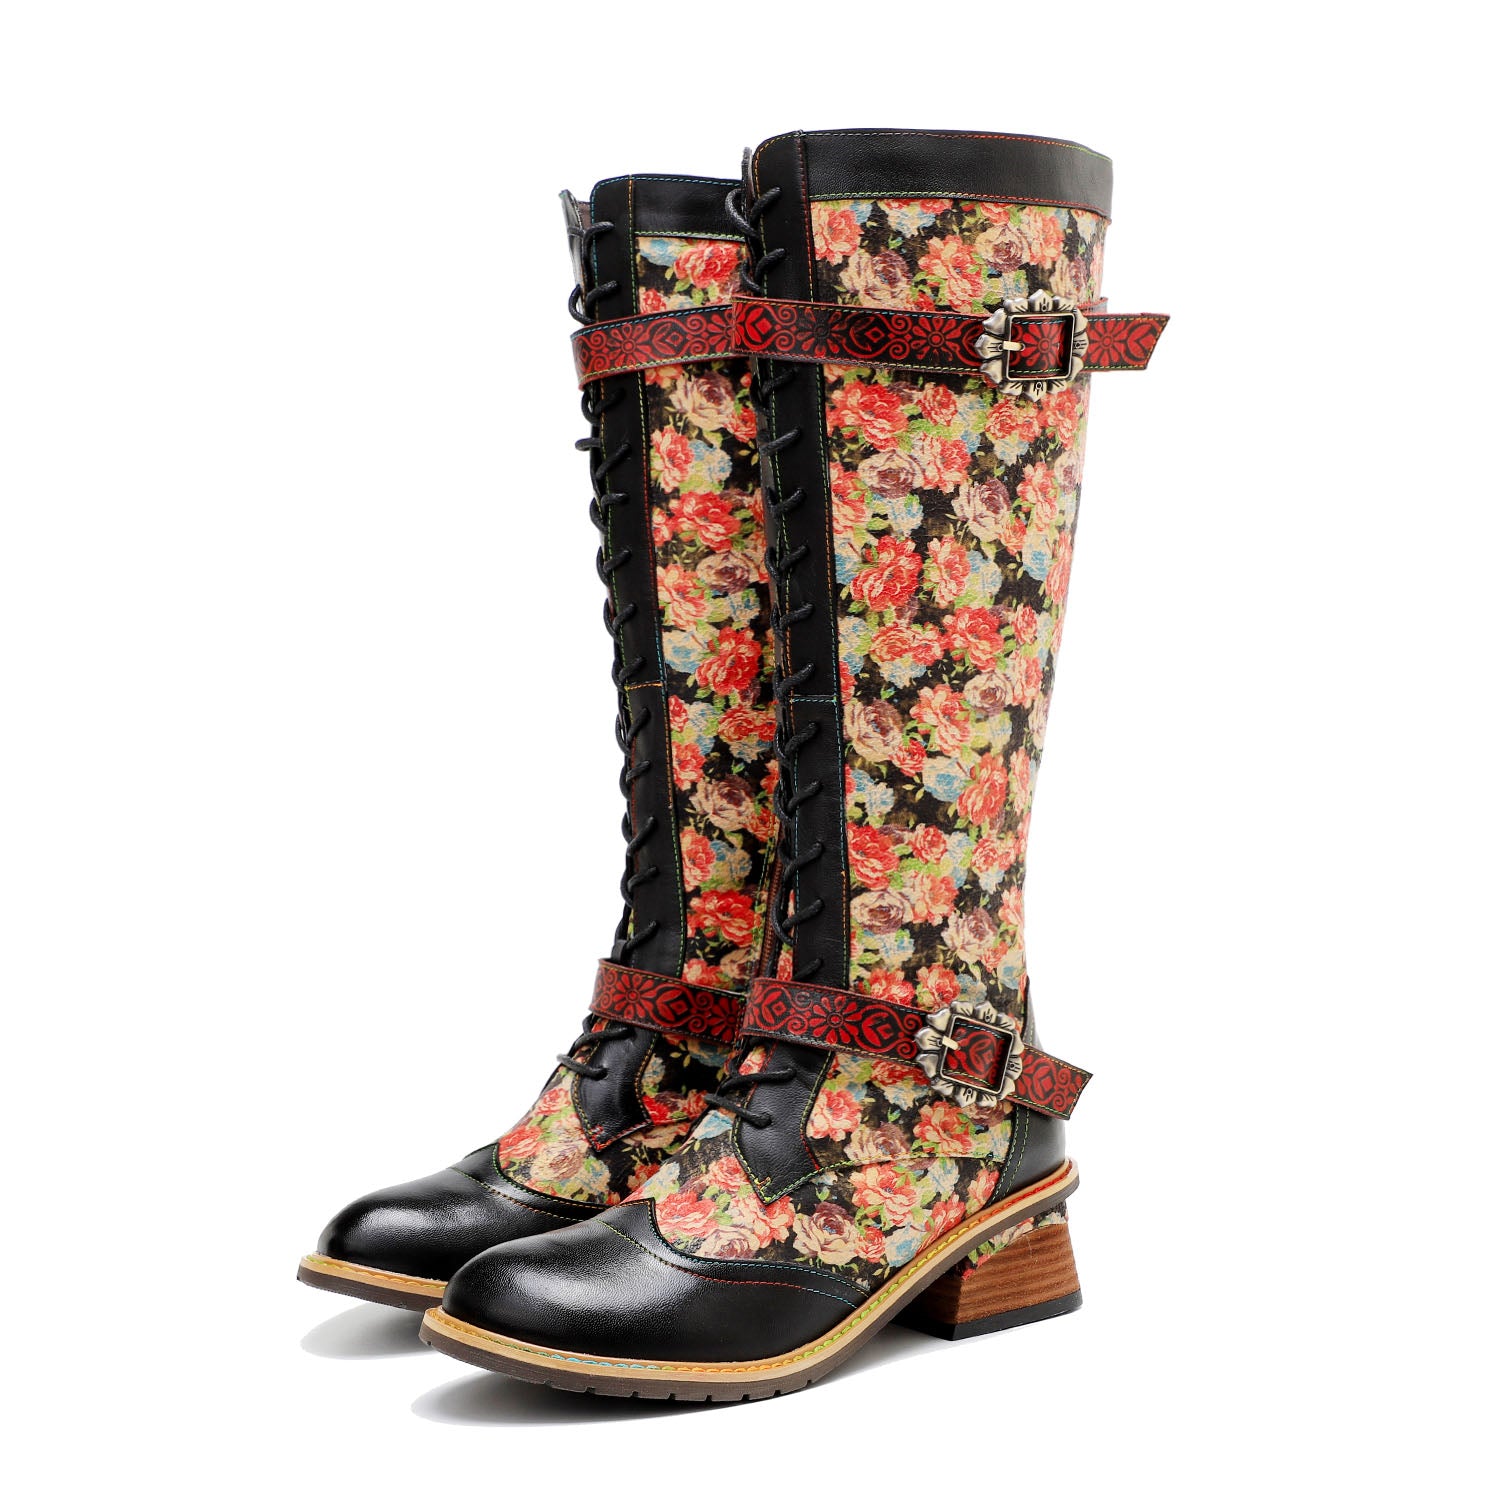 Women'sVintage Hand-printed Stunning Floral Boots